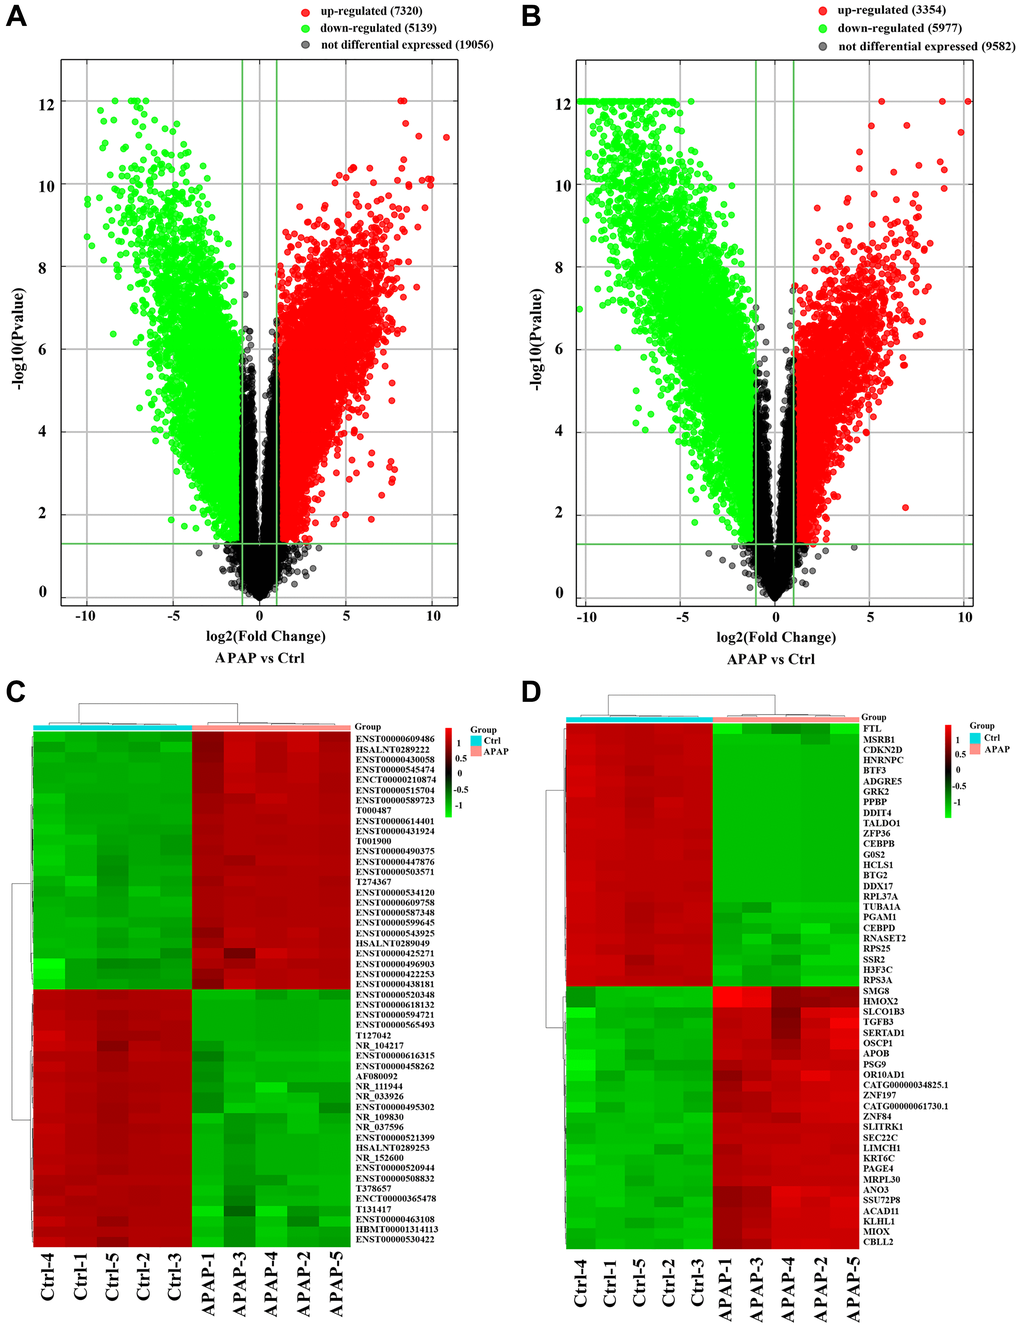 Identification of DE lncRNAs and mRNAs in APAP patients. (A, B) Volcano plots presenting differences in the expression of lncRNAs and mRNAs between the APAP and control groups. Values plotted on the x- and y-axes represent the averaged normalized signal values of each group (log2-scaled). Red indicates upregulation, green indicates downregulation and black indicates no difference. (C, D) Heatmaps showing the expression profiles of the top DE lncRNAs and mRNAs.